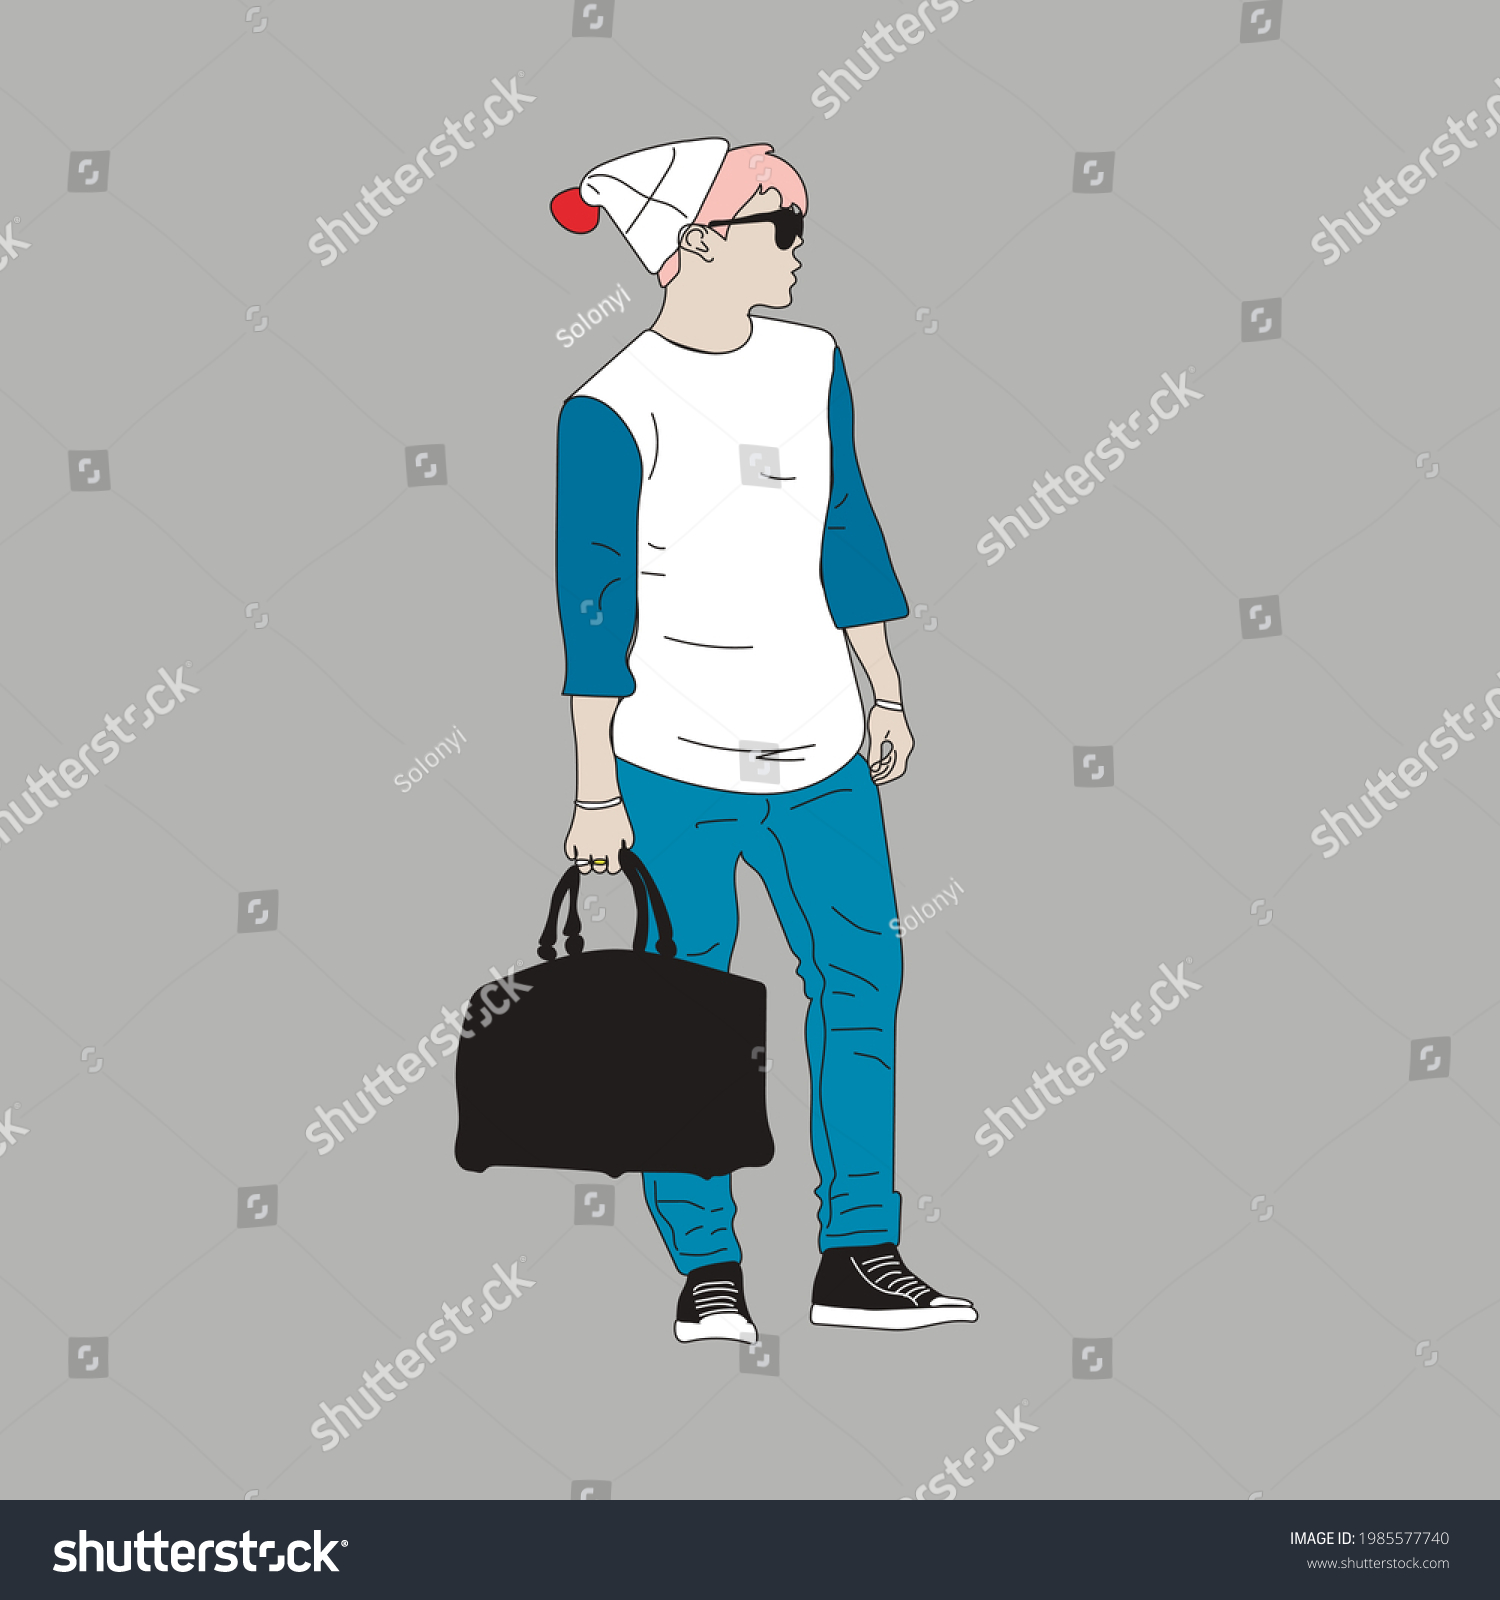 SVG of Vector illustration of Kpop street fashion. Street idols of Koreans. Kpop men's fashion idol. A guy in jeans and a white hat with a black bag. svg